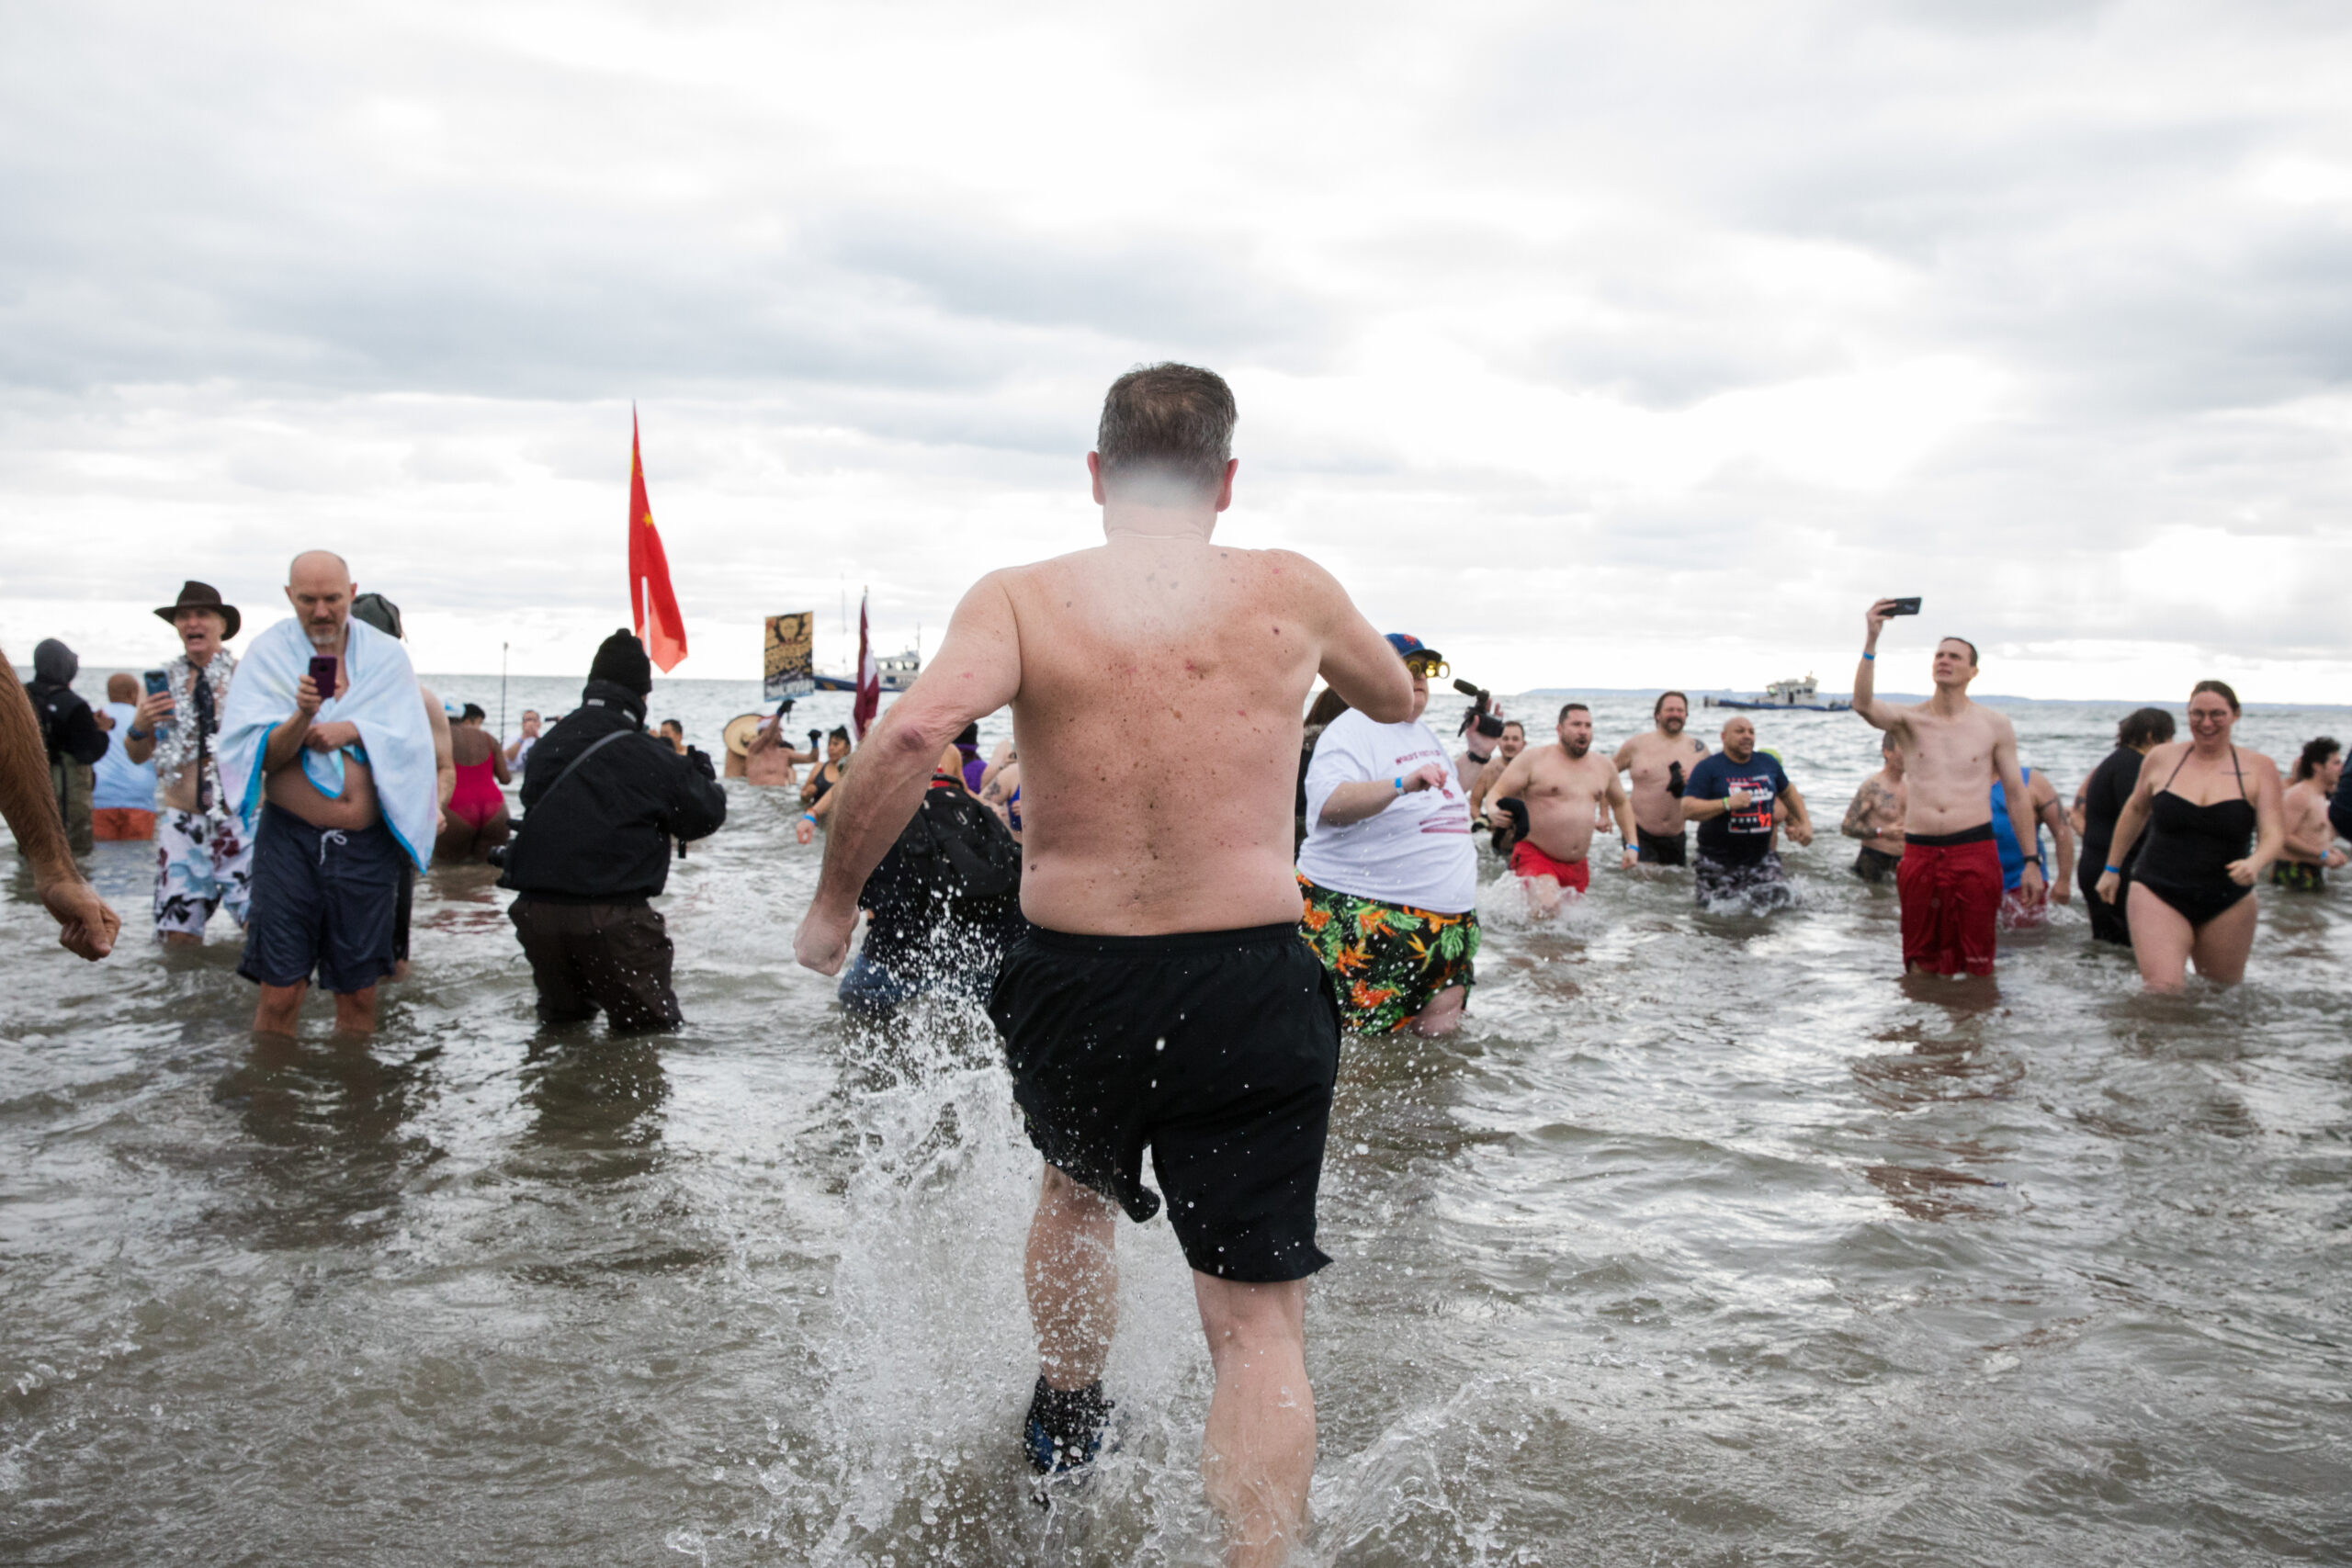 A man lifts his knees as he marches into the ocean to meet his fellow plunge participants.